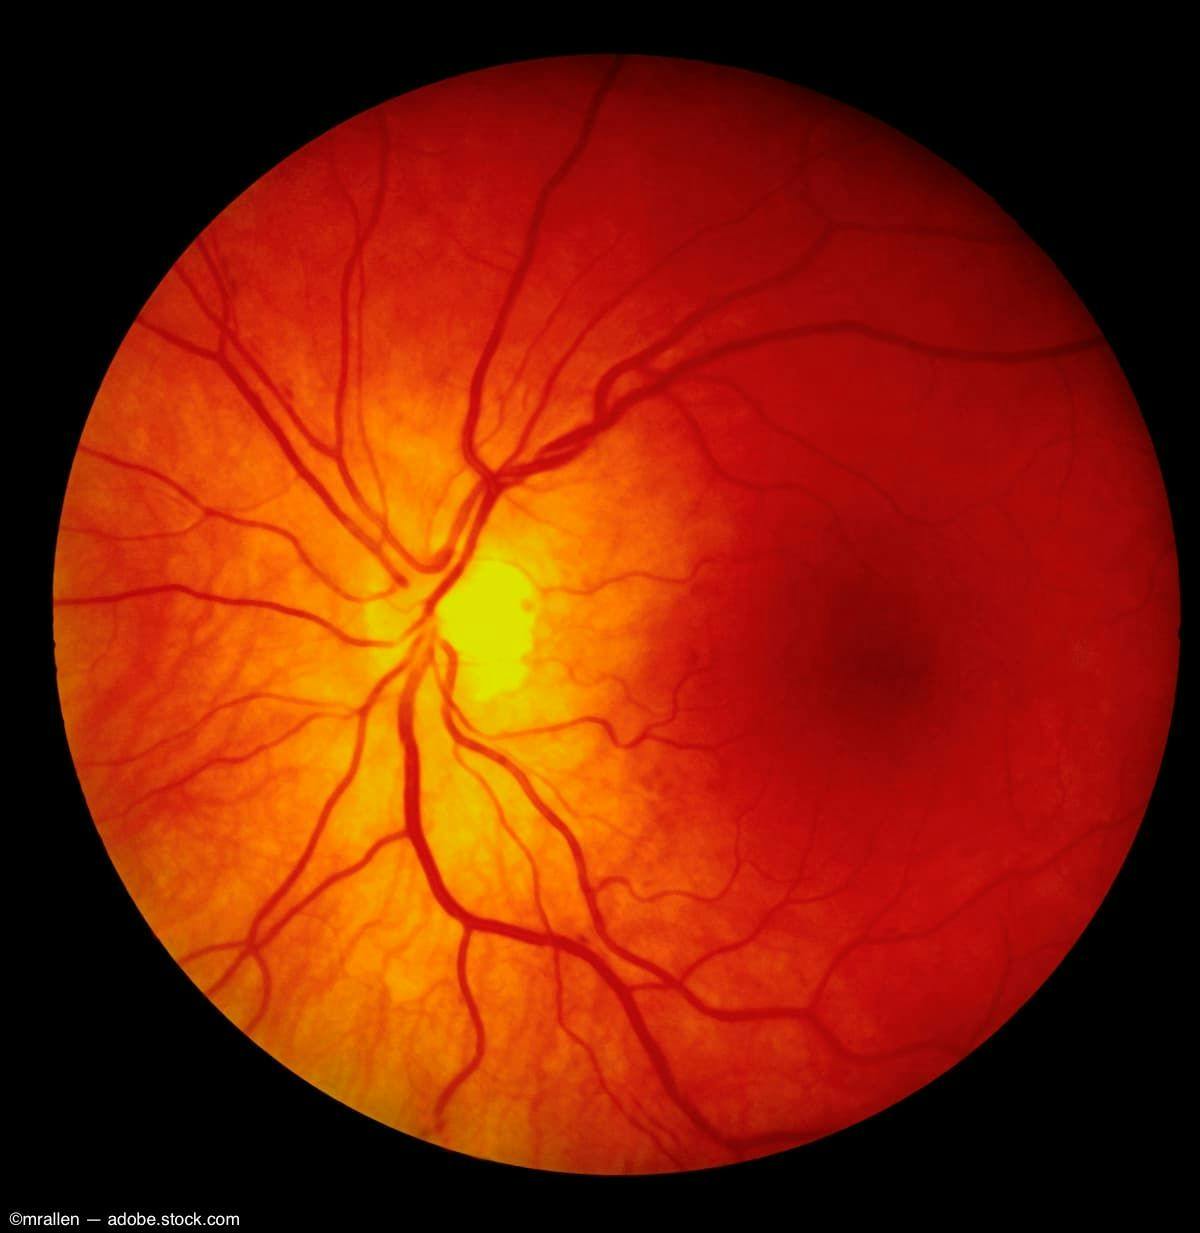 Structural and vascular changes detected in RVO affected eyes and unaffected fellow eyes 